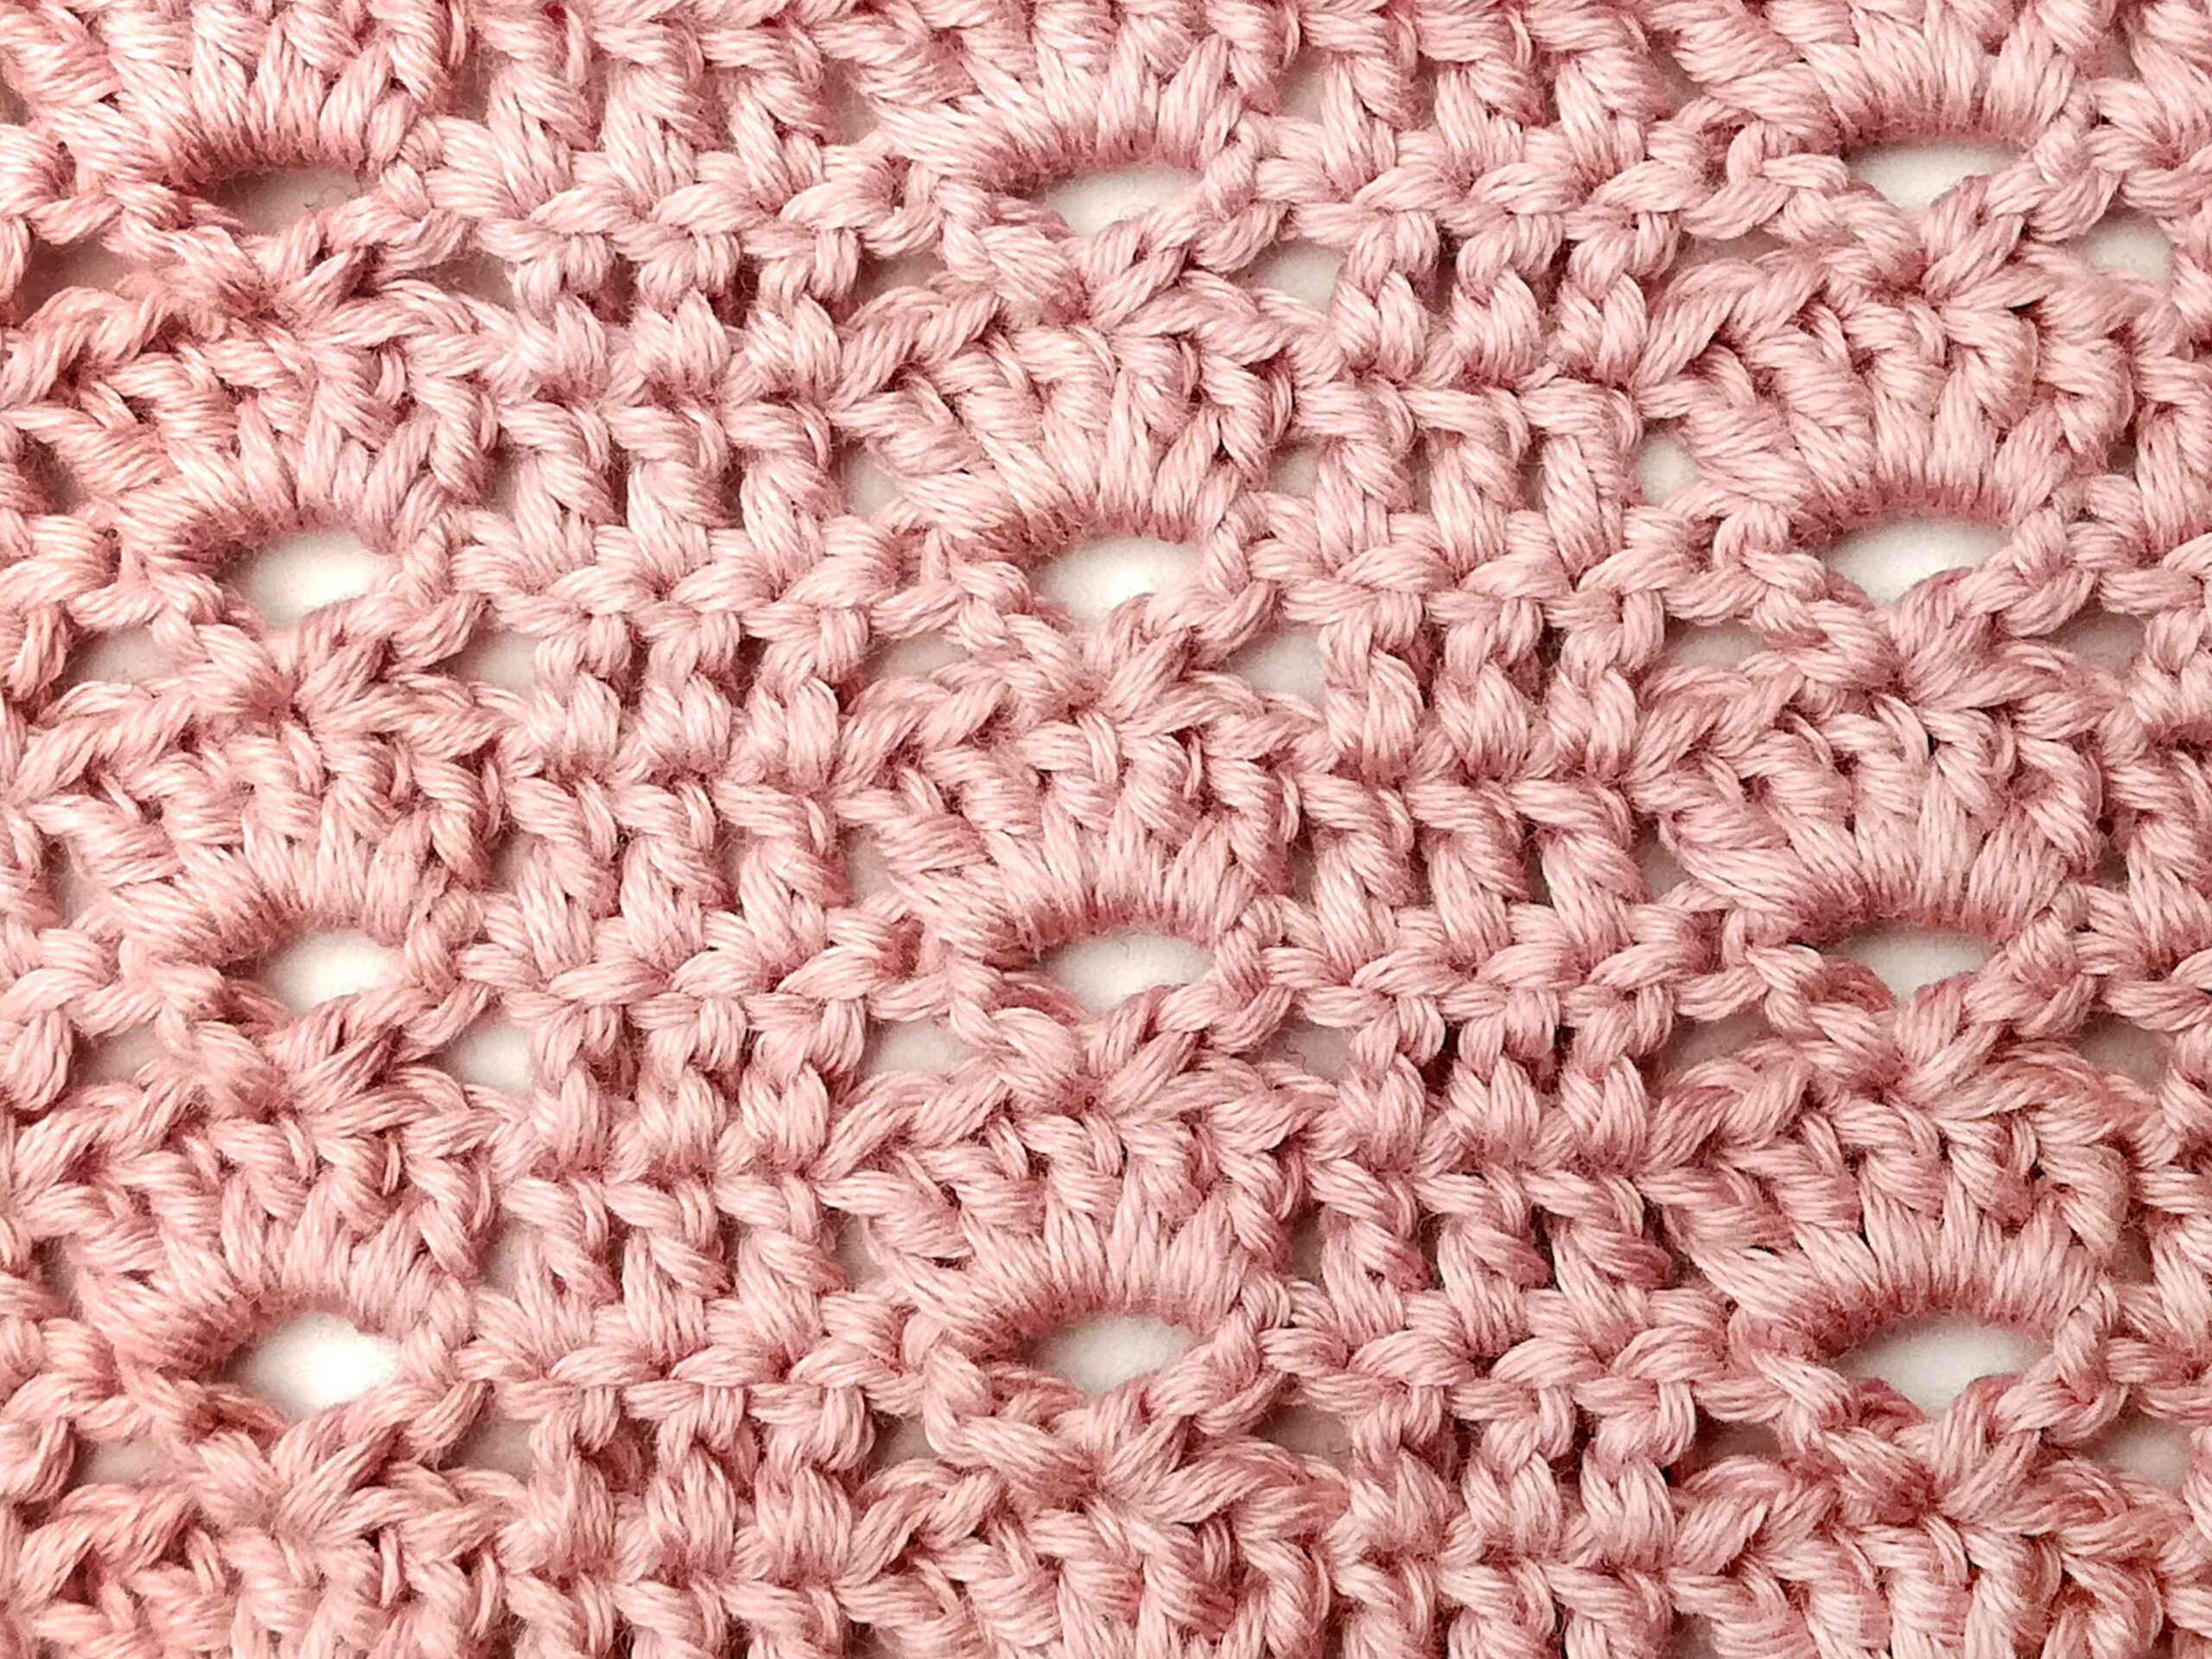 Crochet stitch photo and video tutorial: The column and fan stitch